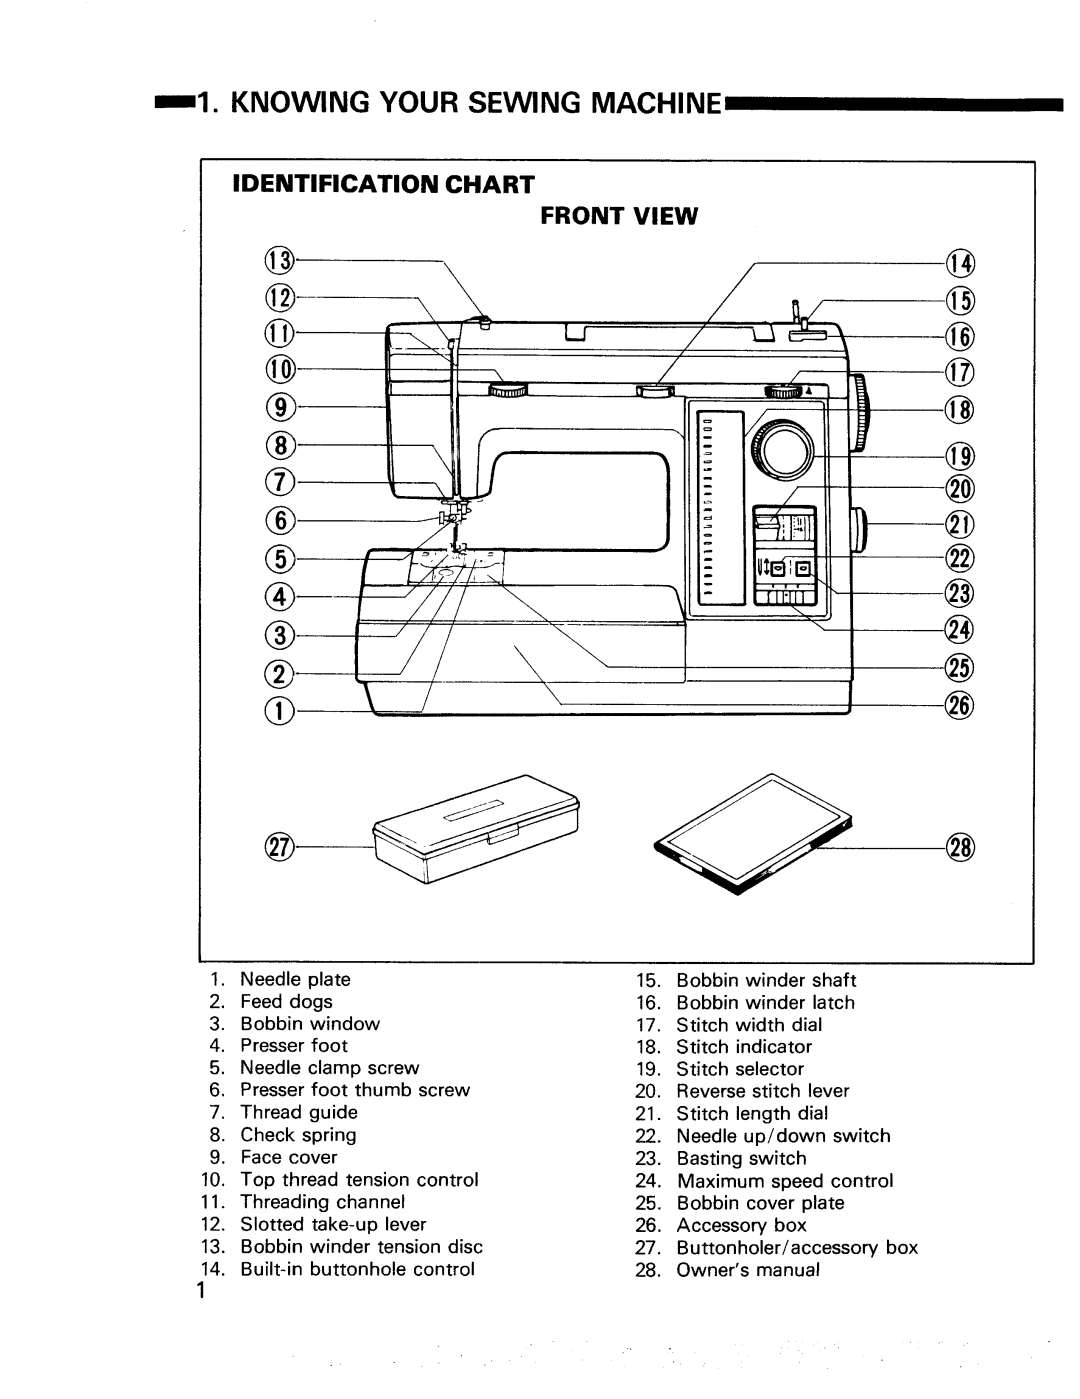 Kenmore 17920, 17922 manual @ @ @ @ @ @, Knowing Your Sewing Machine, Identification Chart Front View, L..f 